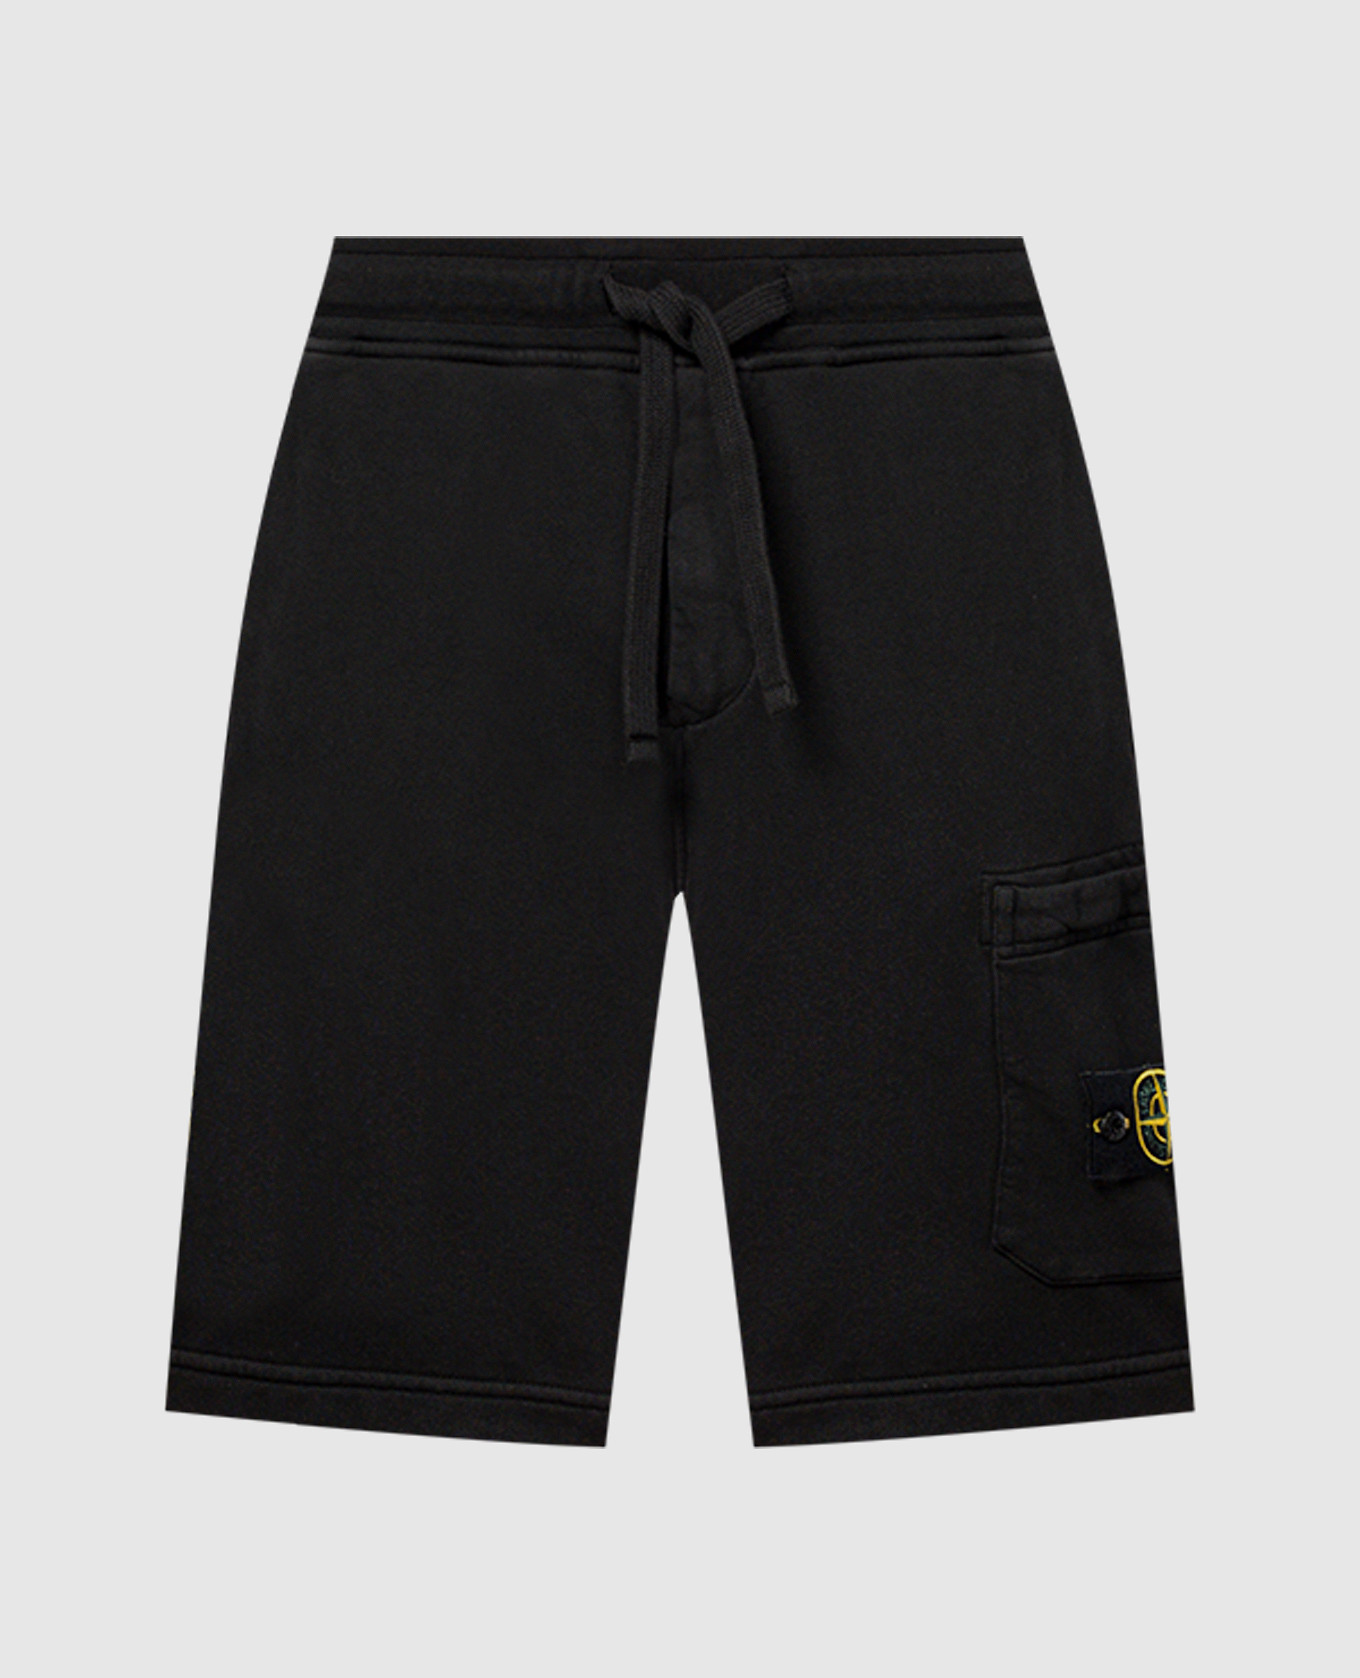 Black shorts with removable logo patch